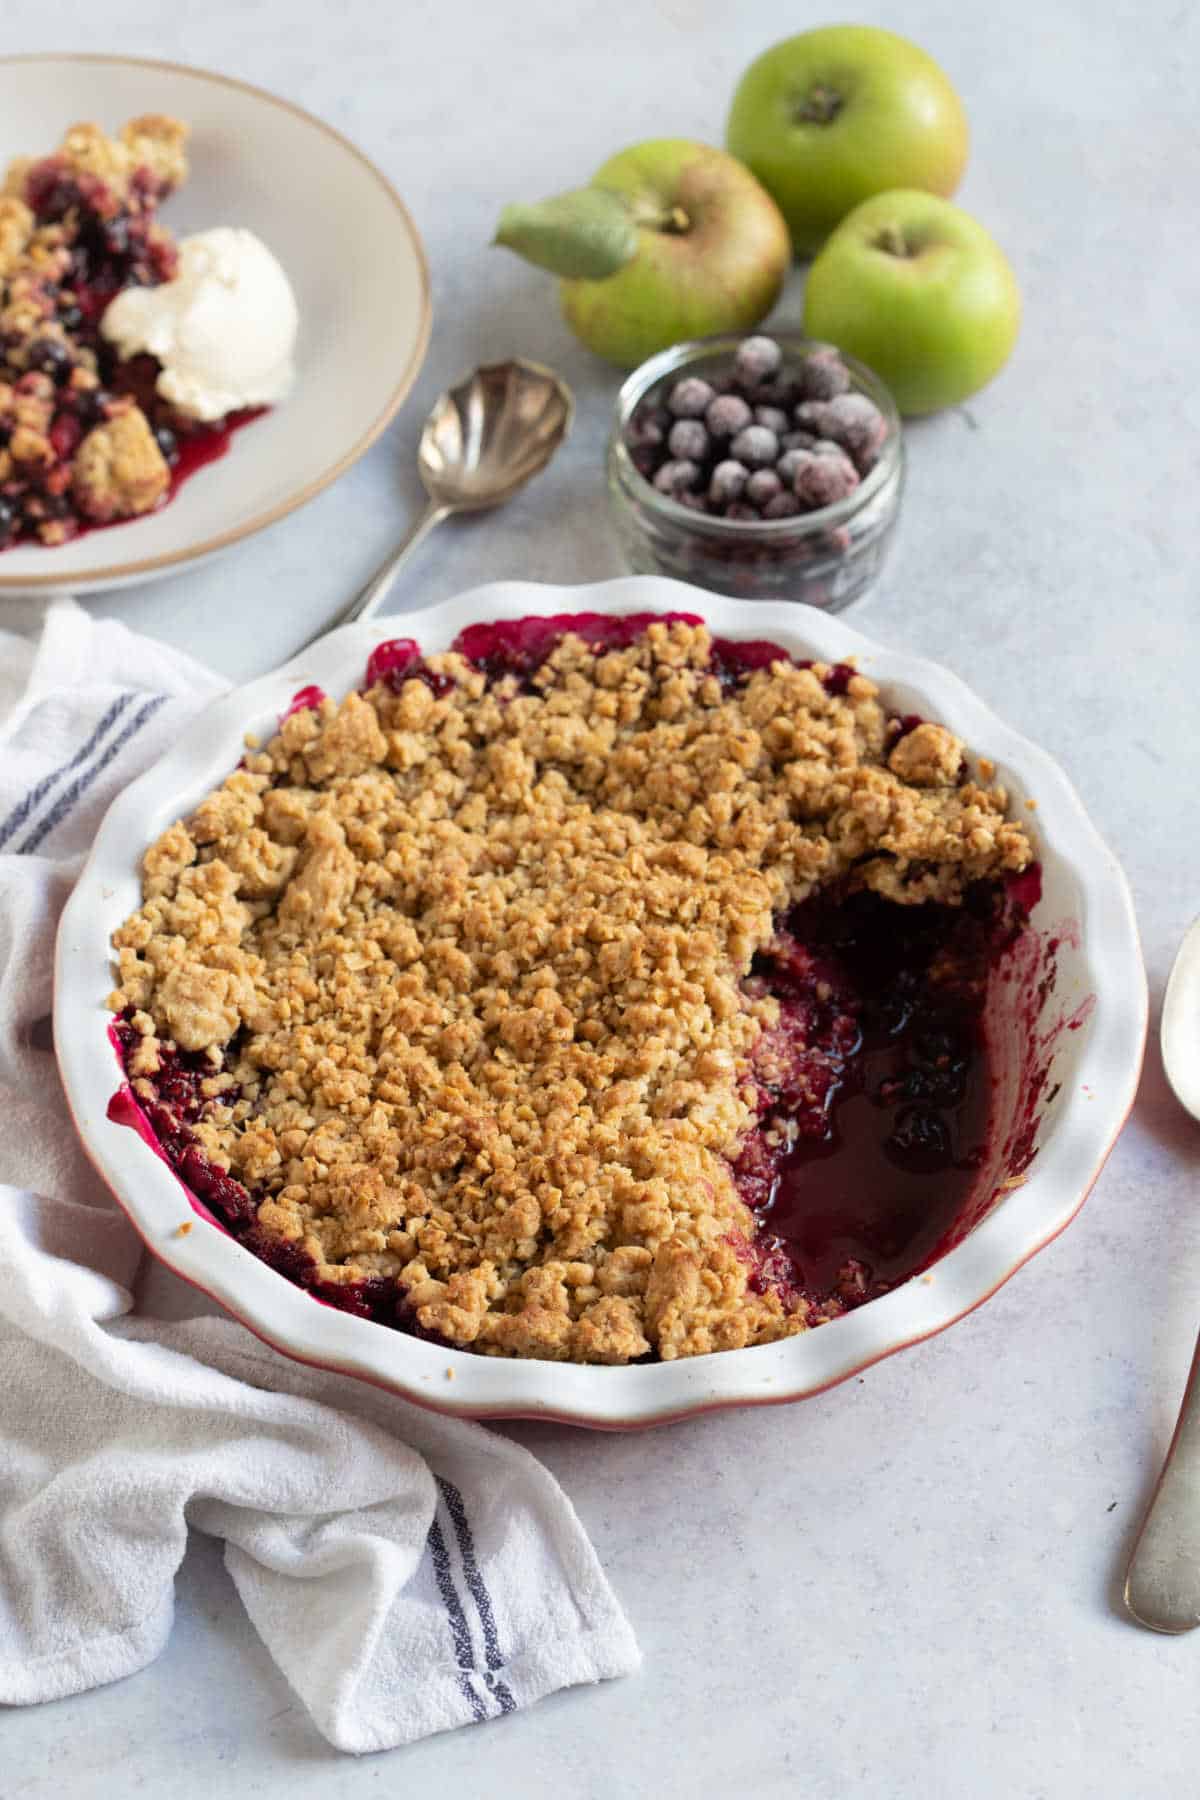 Blackcurrant crumble in a pie dish with a bowl of blackcurrants and Bramley apples behind.